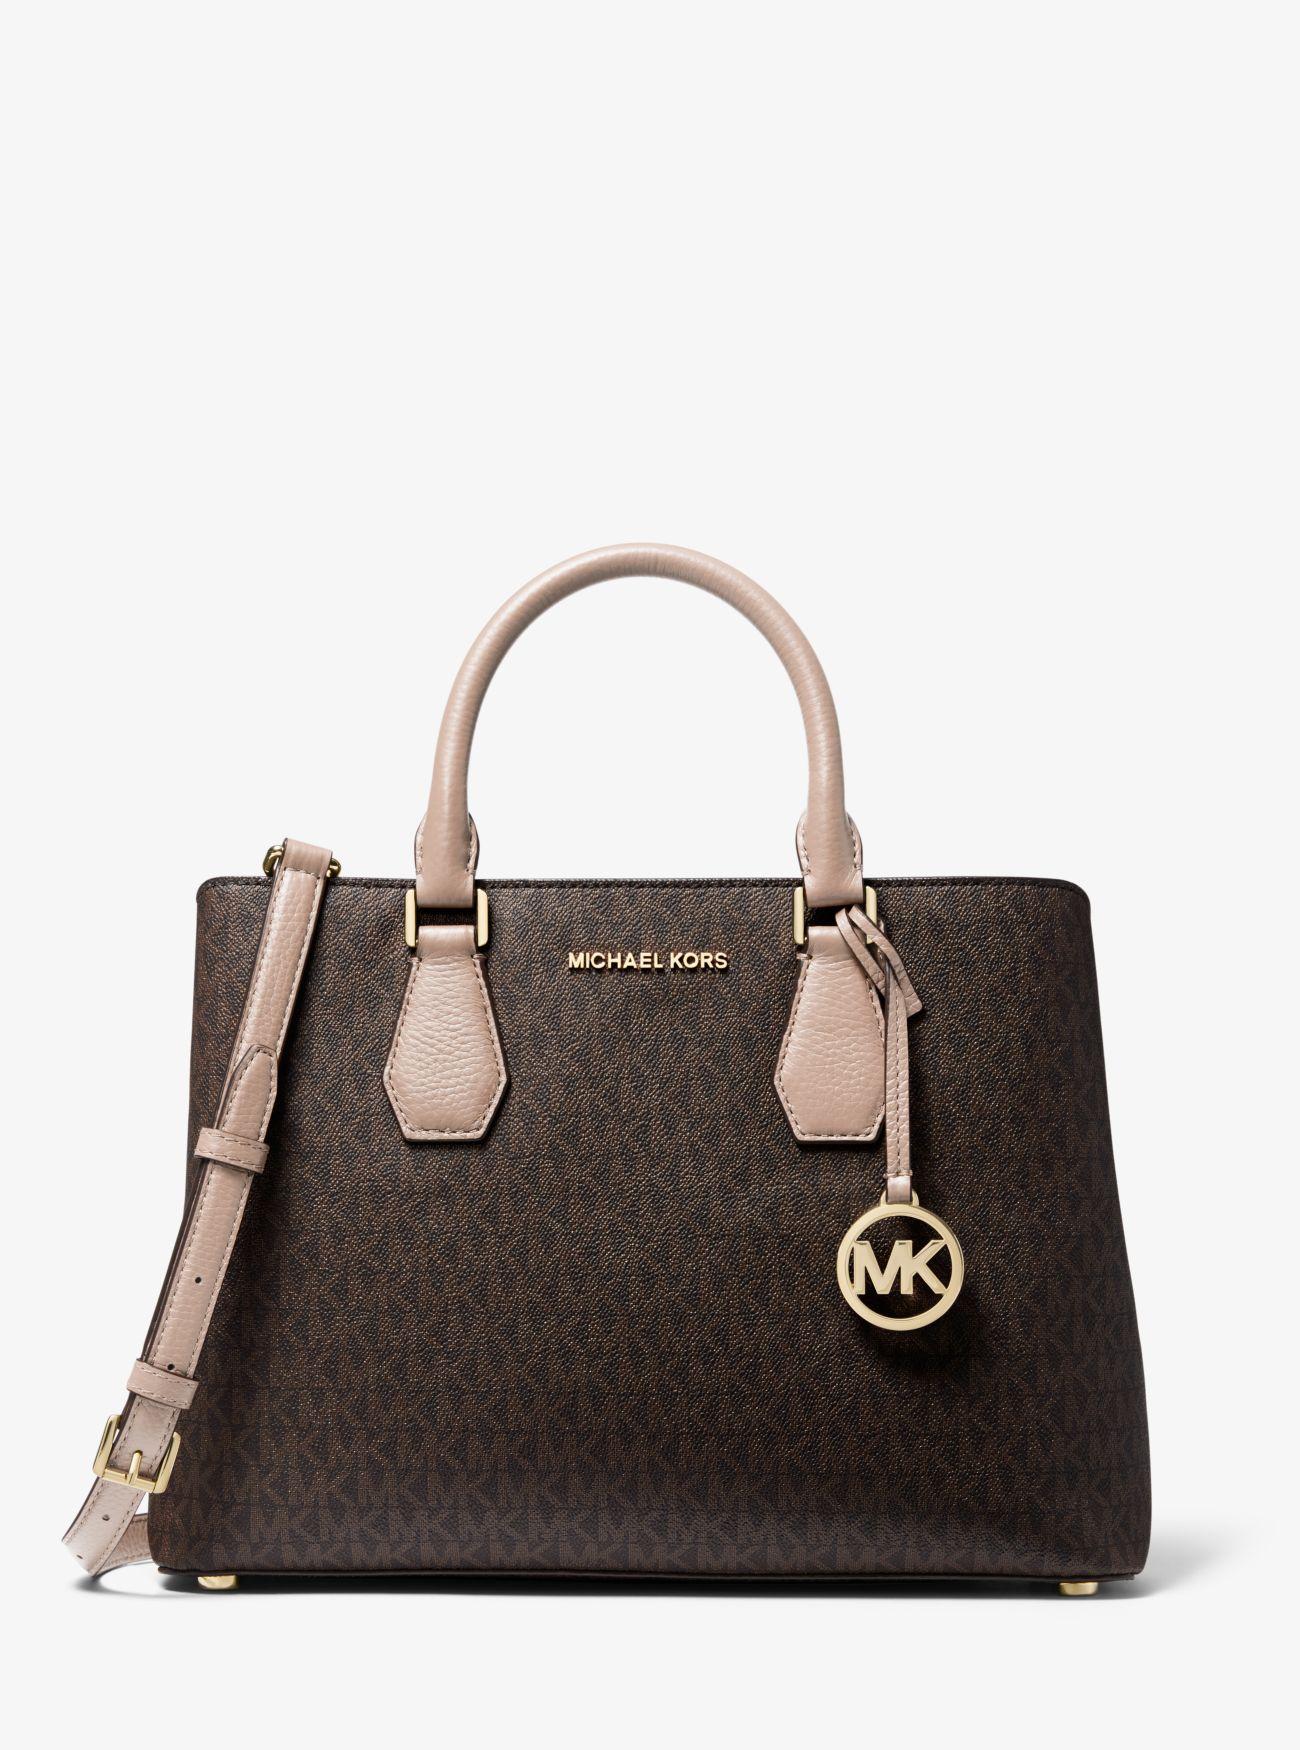 Michael Kors Camille Large Logo Leather Satchel in Brown - Lyst